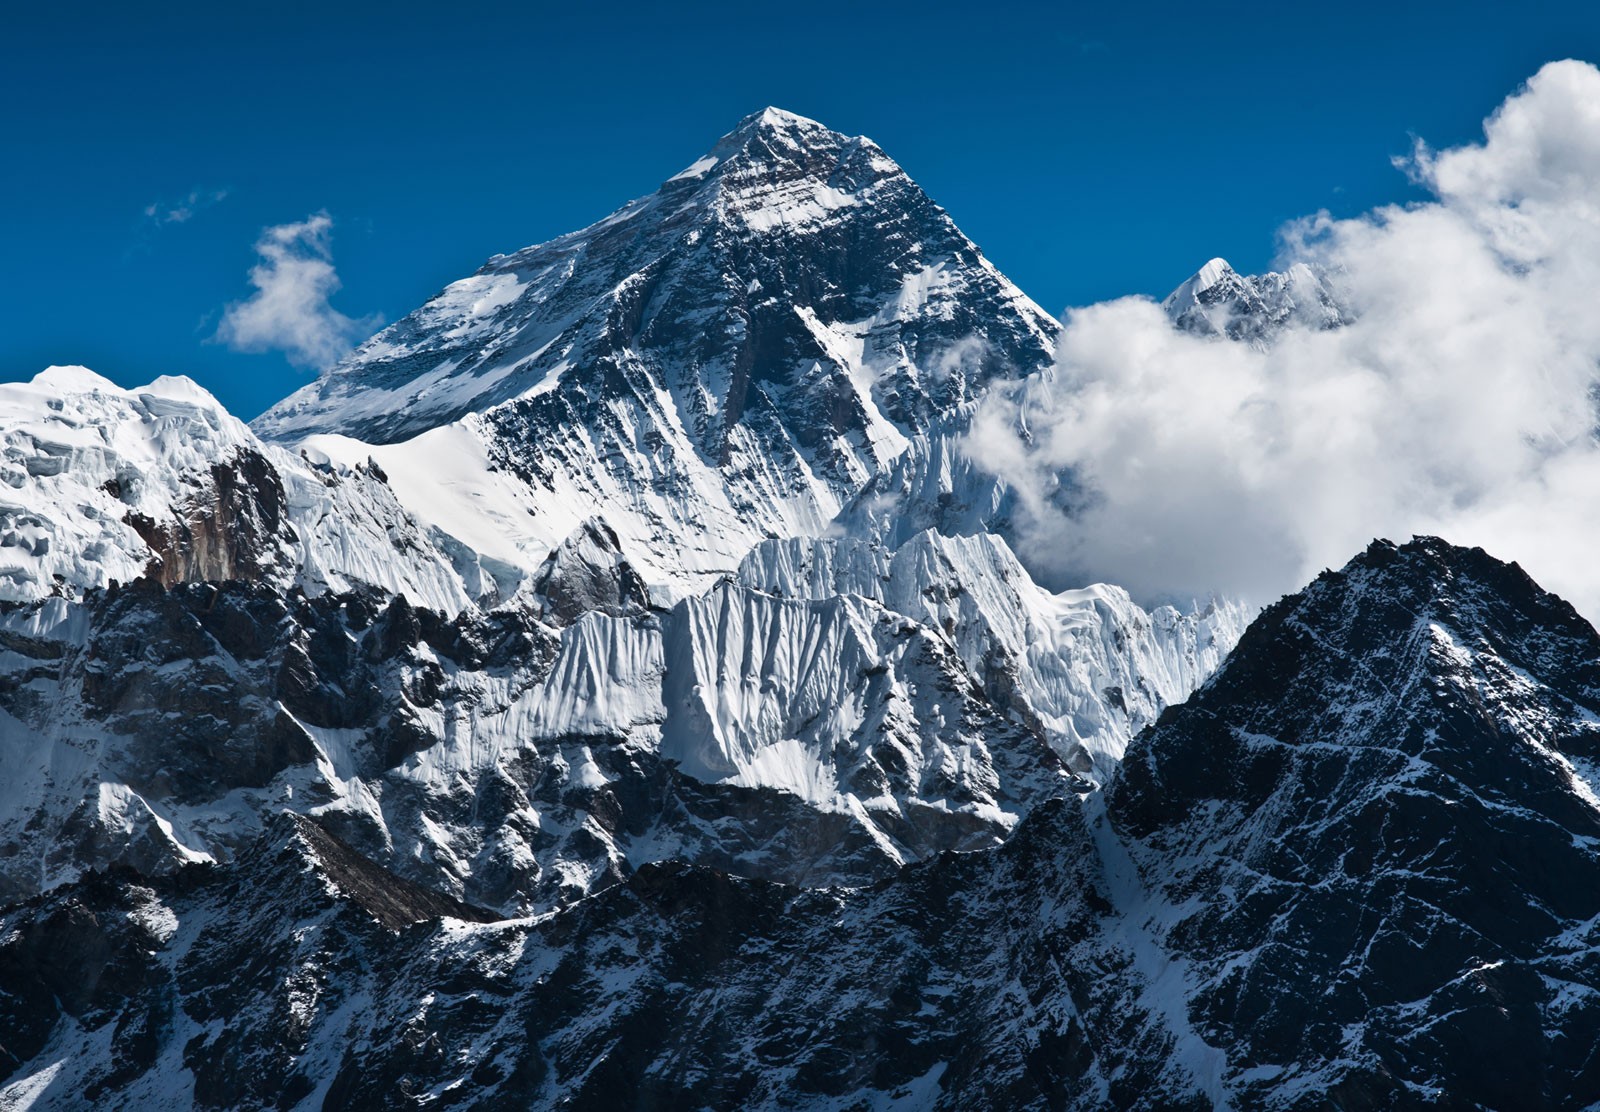 151 aspiring climbers permitted for expeditions including for Sagarmatha